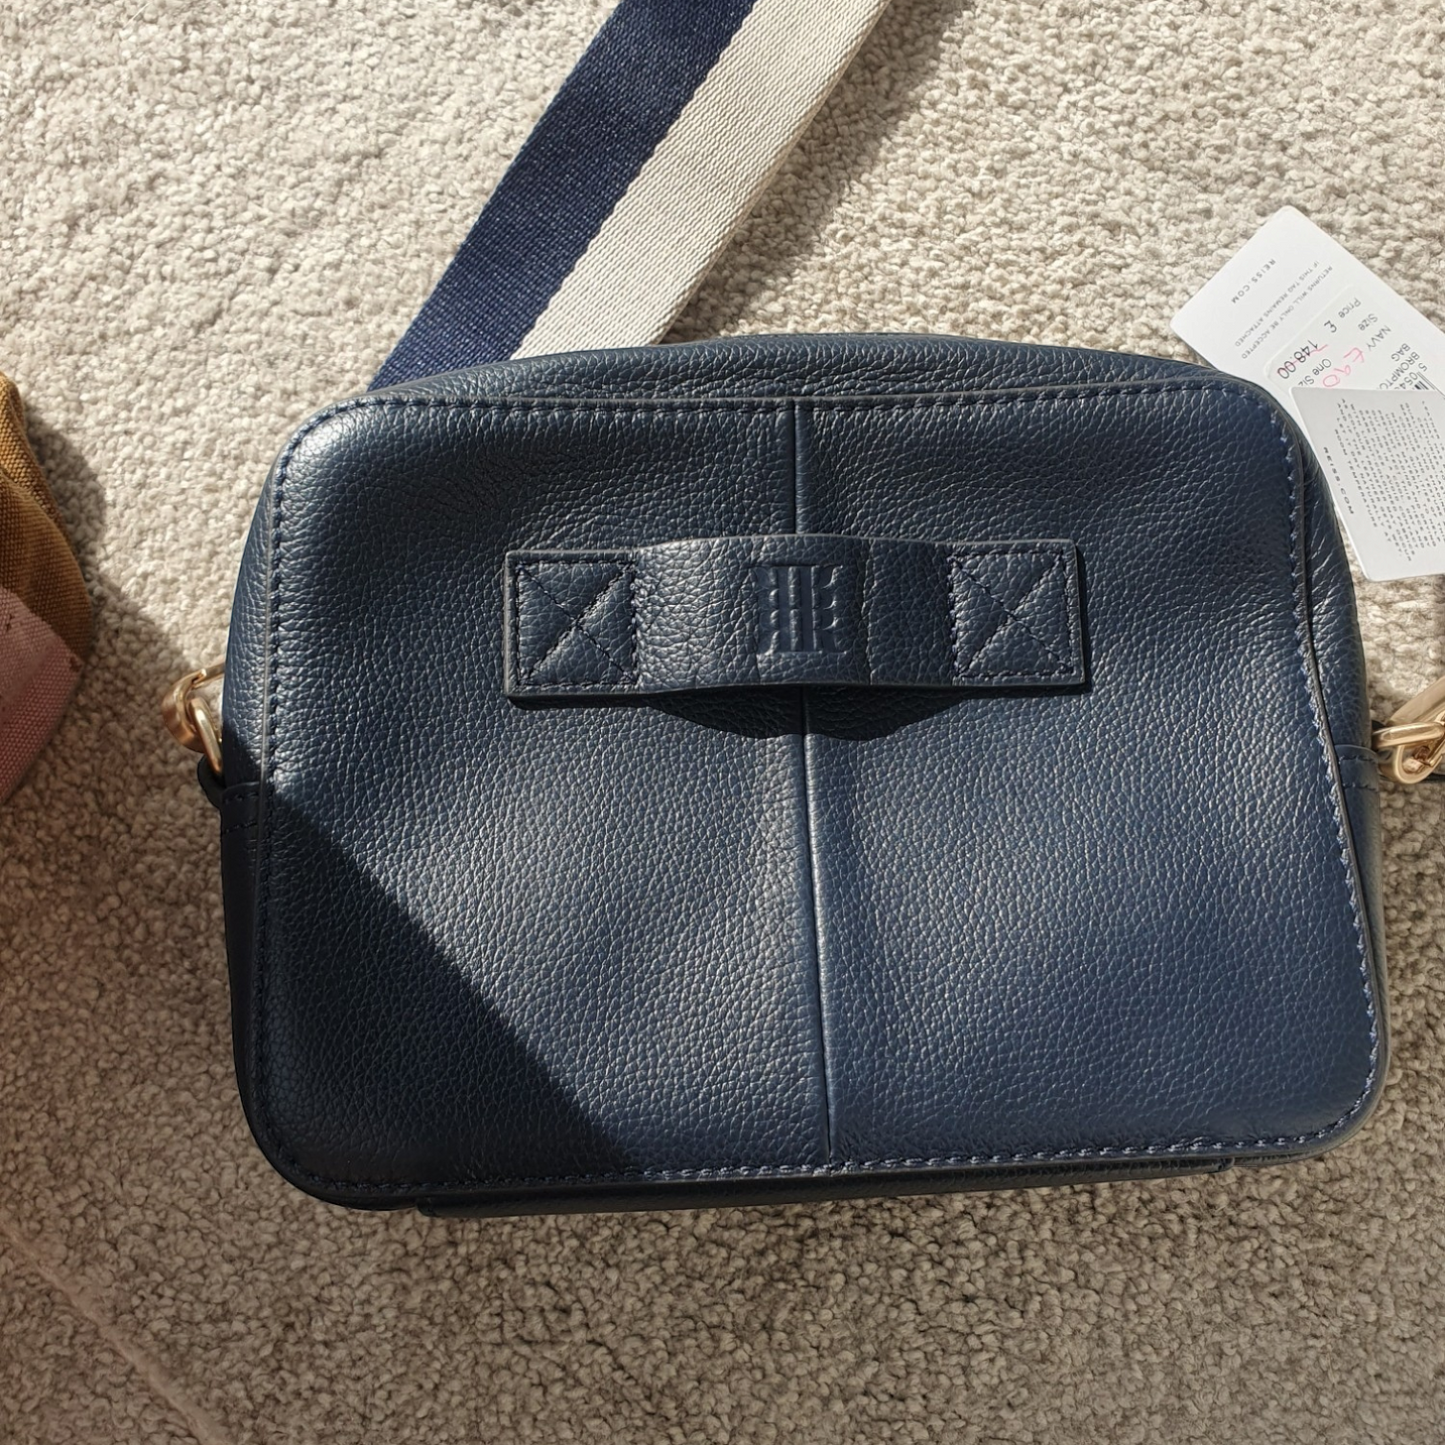 Reiss Navy leather camera bag, two straps, brand new